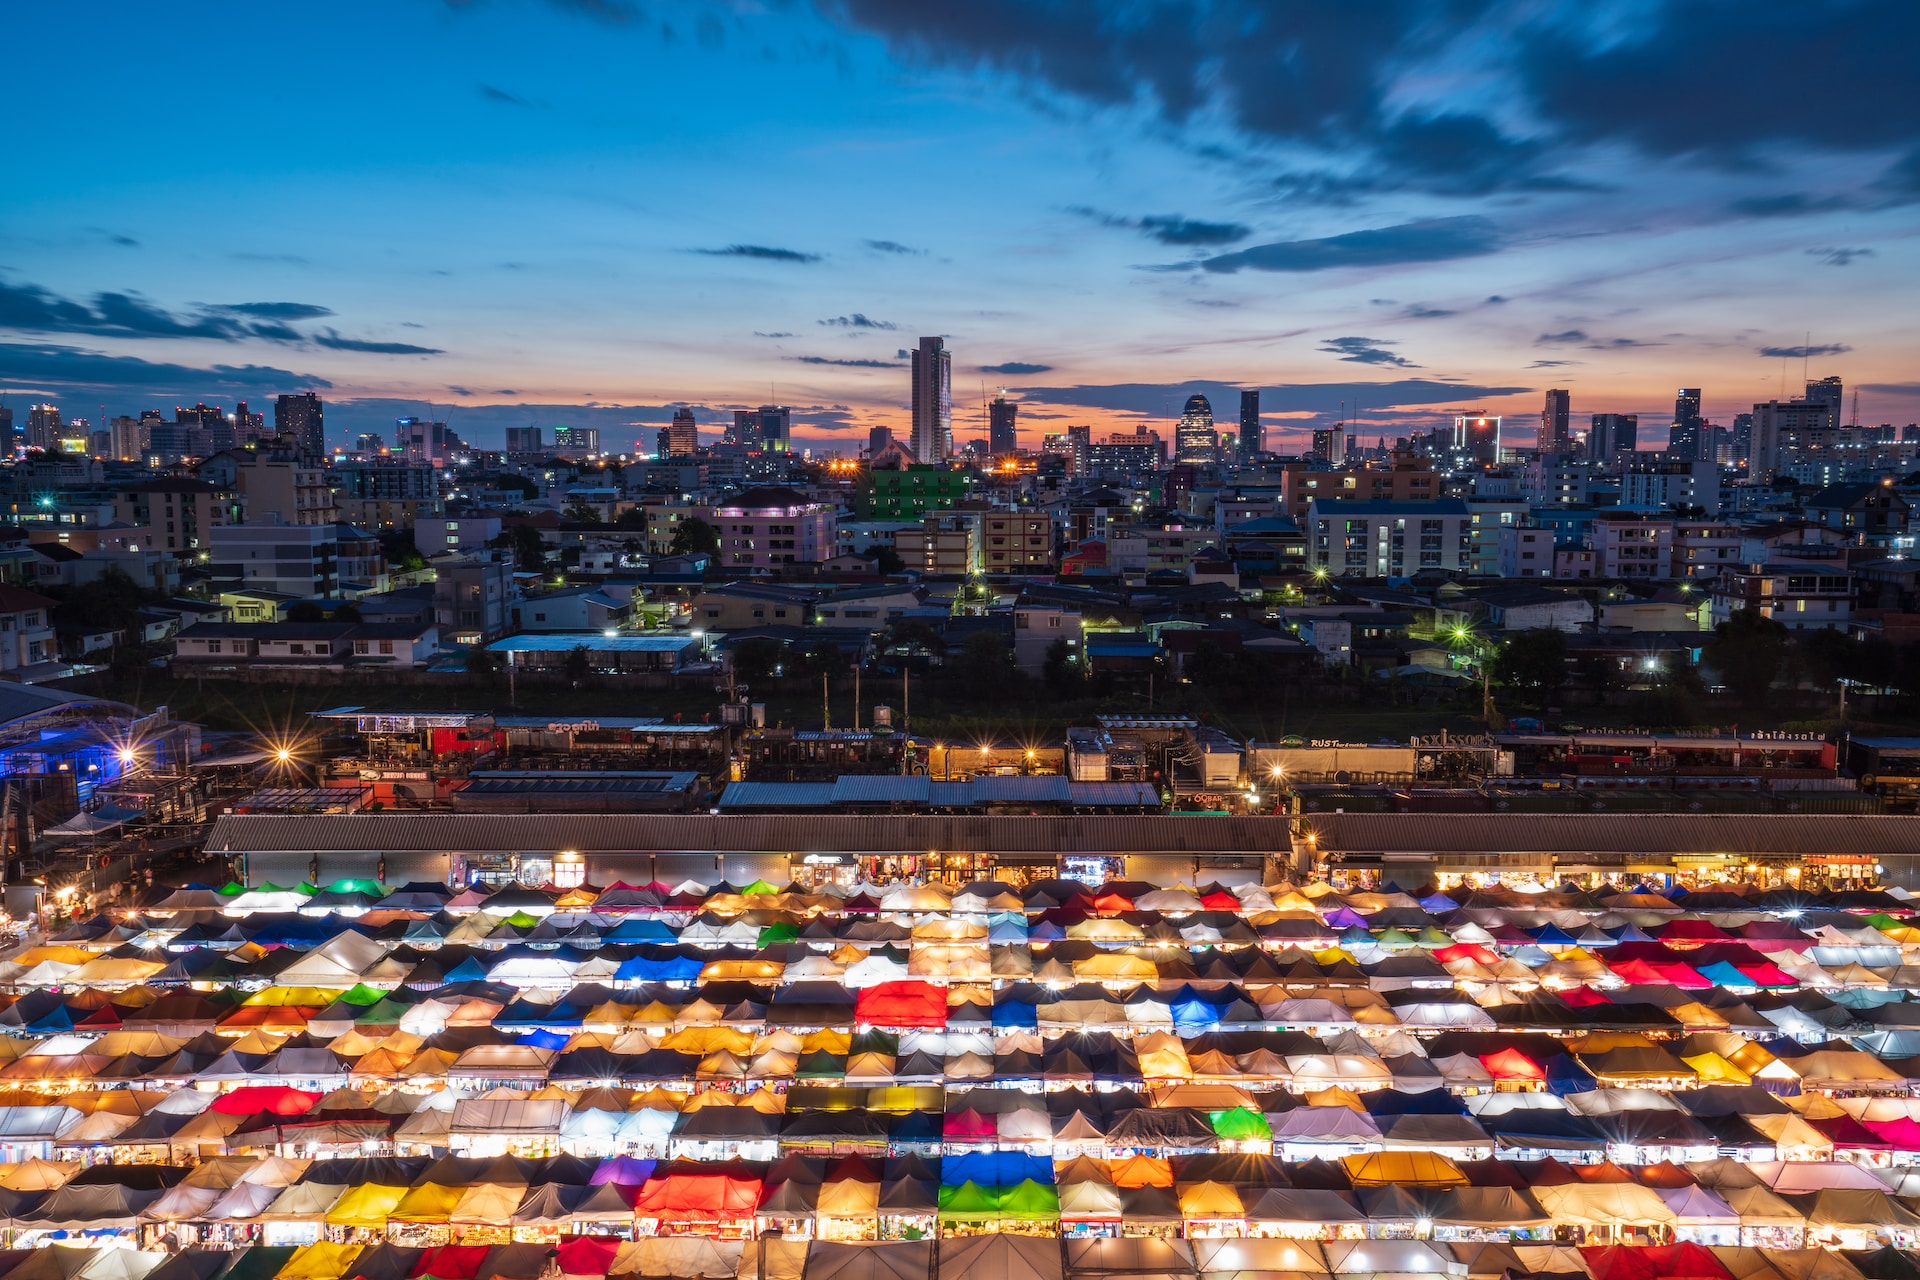 Train night market Ratchada, Bangkok, Thailand, outdoors, landscape images & pictures, nature images, HD scenery wallpapers, HD water wallpapers, waterfront, port, pier, aerial view, harbor, free images